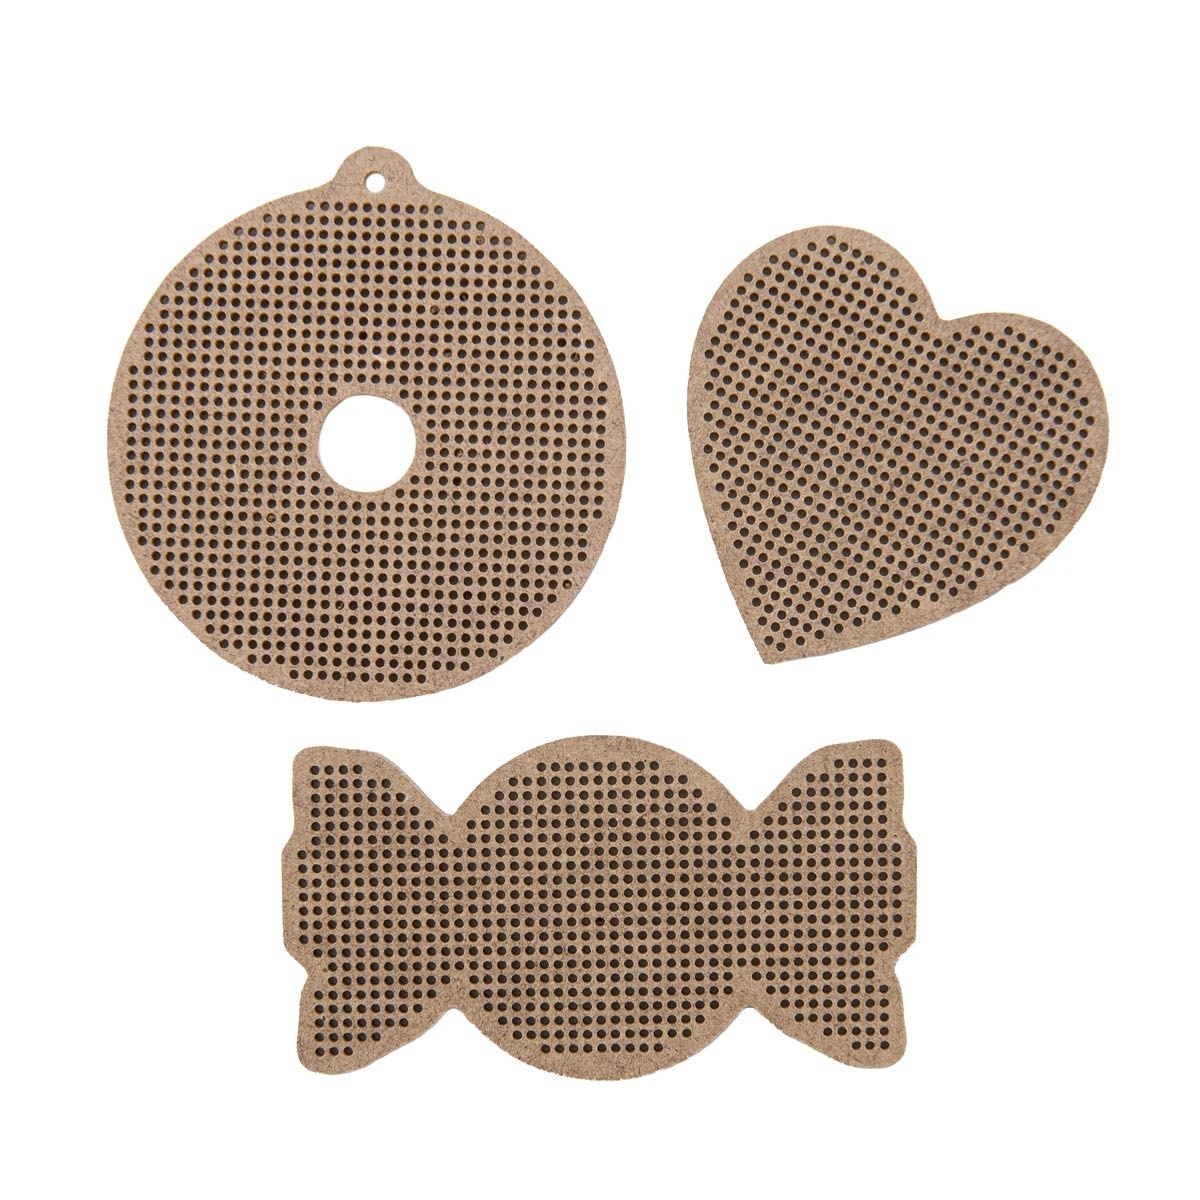 Sweets Perforated Canvas Set фото 1